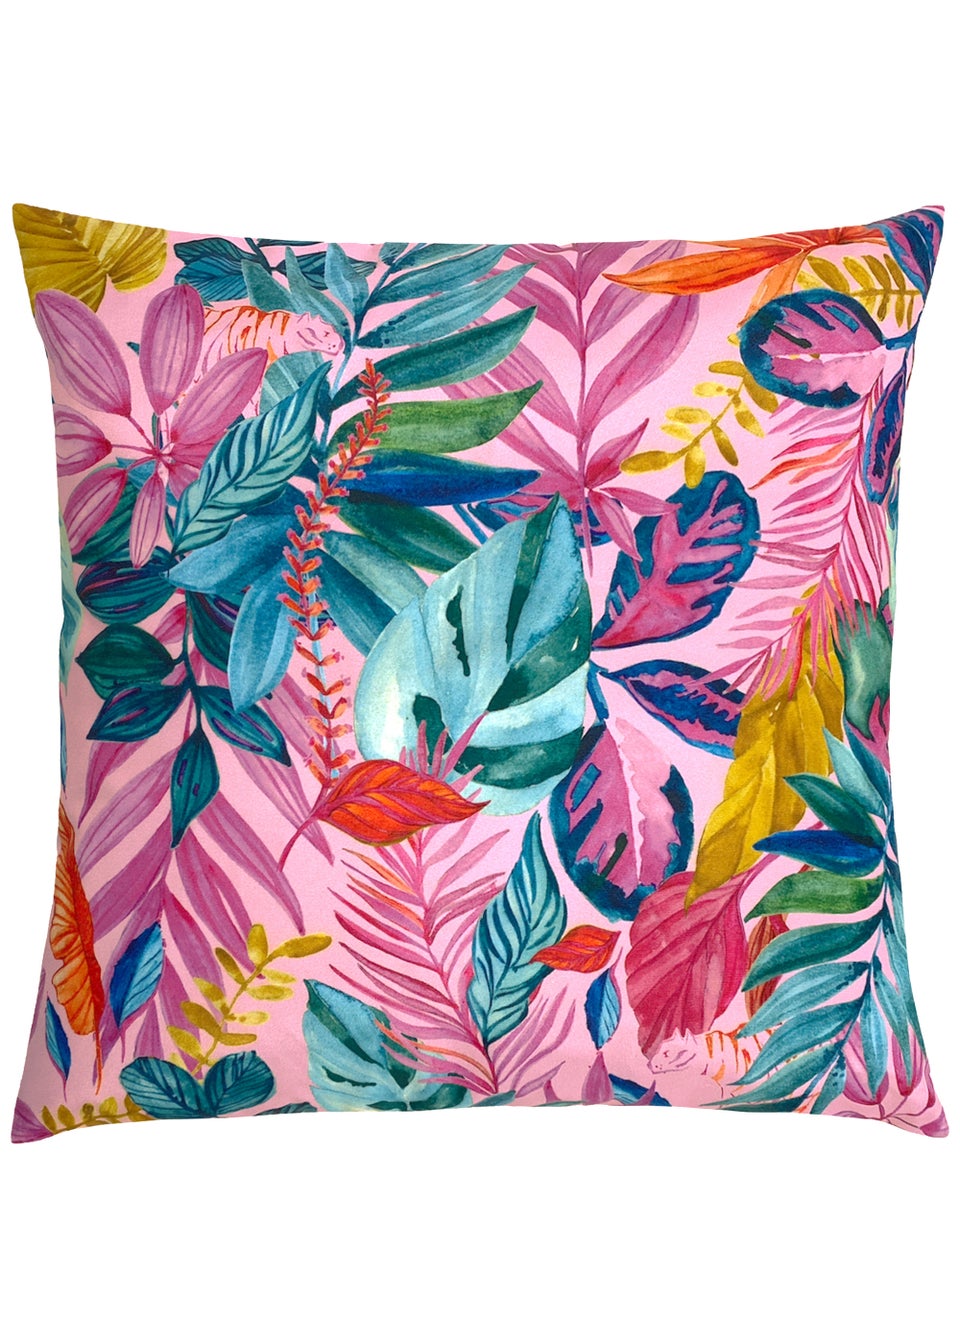 furn. Psychedelic Jungle Outdoor Filled Cushion (43cm x 43cm x 8cm)